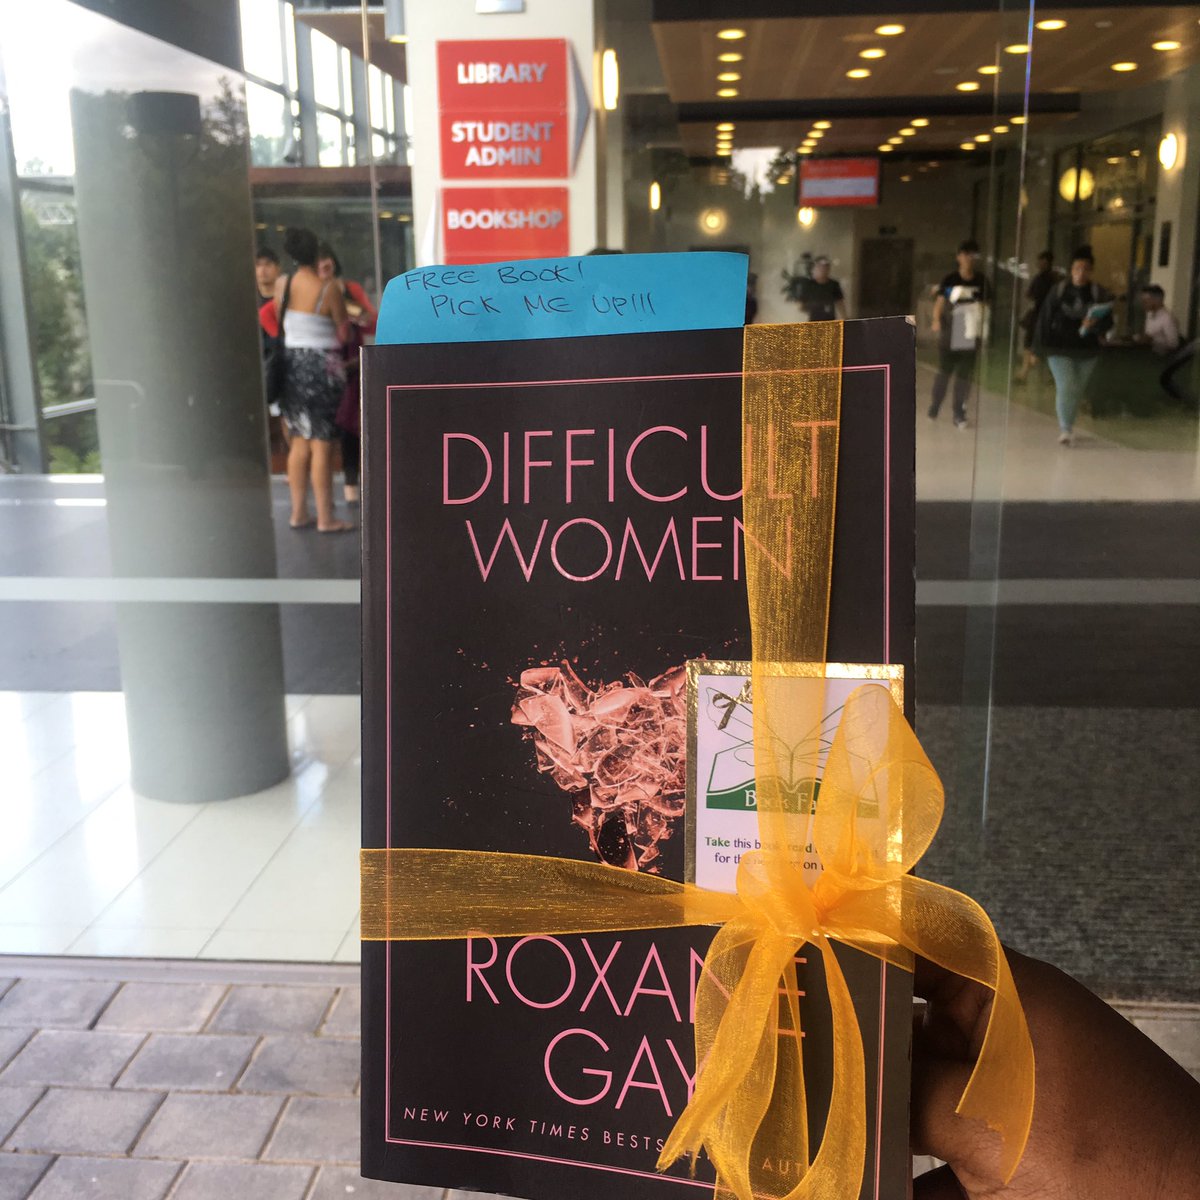 Education is the key to changing and attitudes and mindsets, which is why we left this copy of Difficult Women by @rgay was left at @waikato. Happy birthday to us and happy International Women's Day, everyone! #ibelieveinbookfairies #BookFairyBirthday #bookfairieshamilton